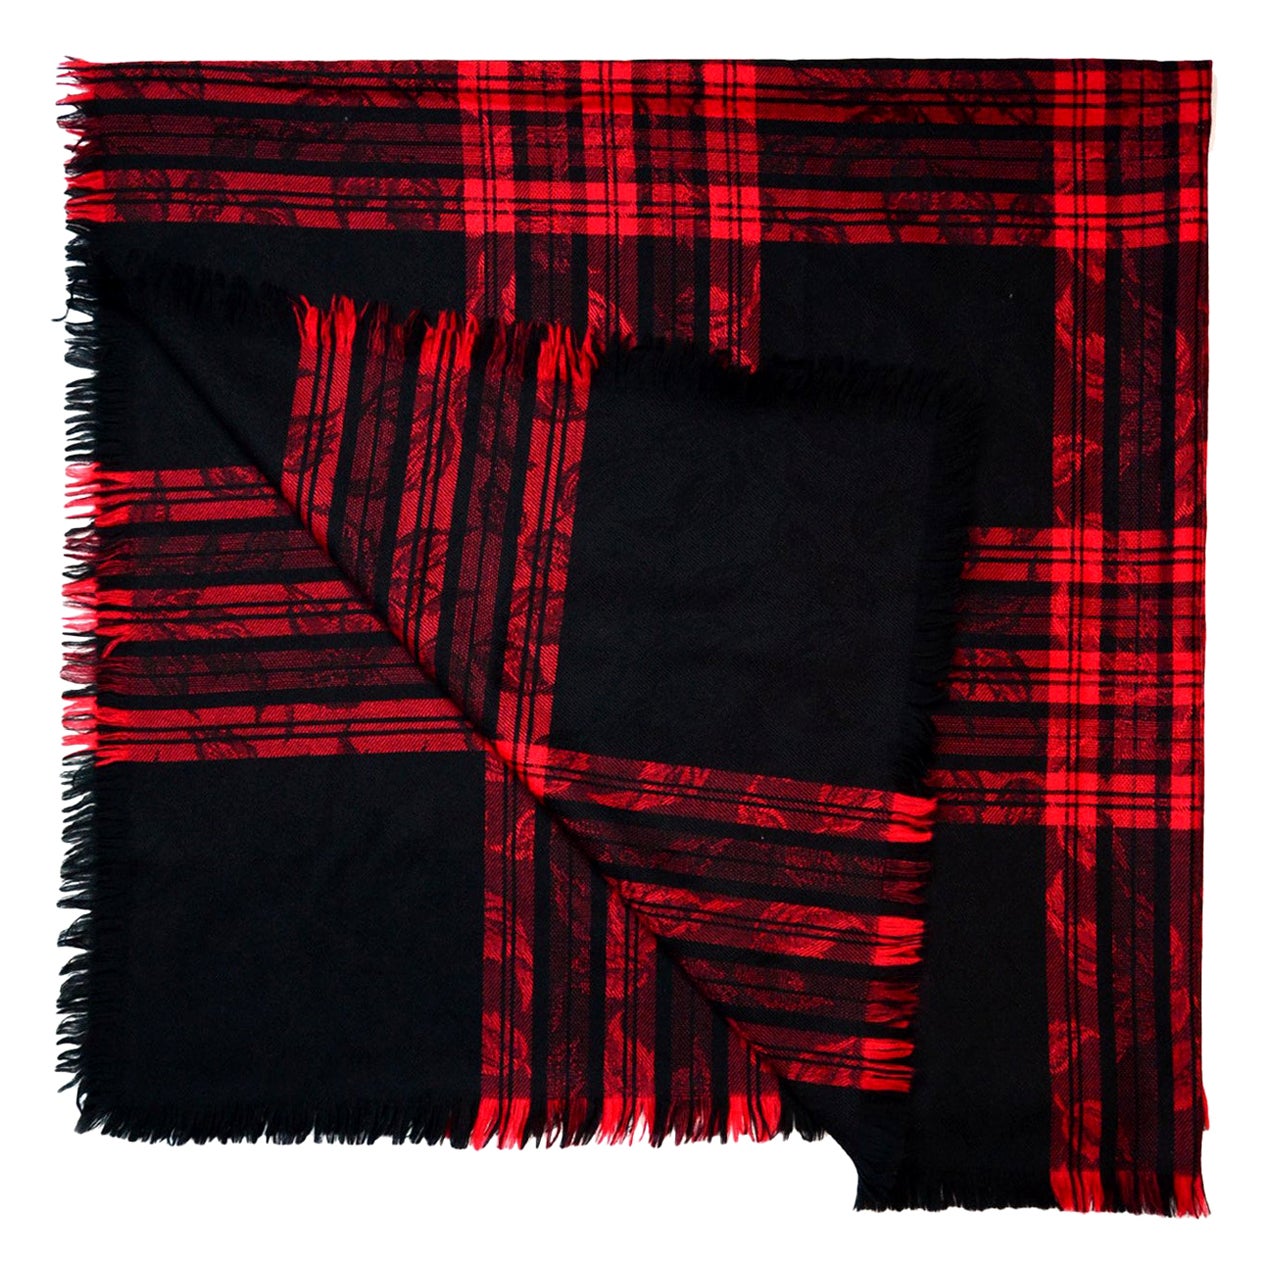 Vuitton Mens Scarf - For Sale on 1stDibs  louis vuitton scarf mens, louis  vuitton men's scarf, louis vuitton men scarf